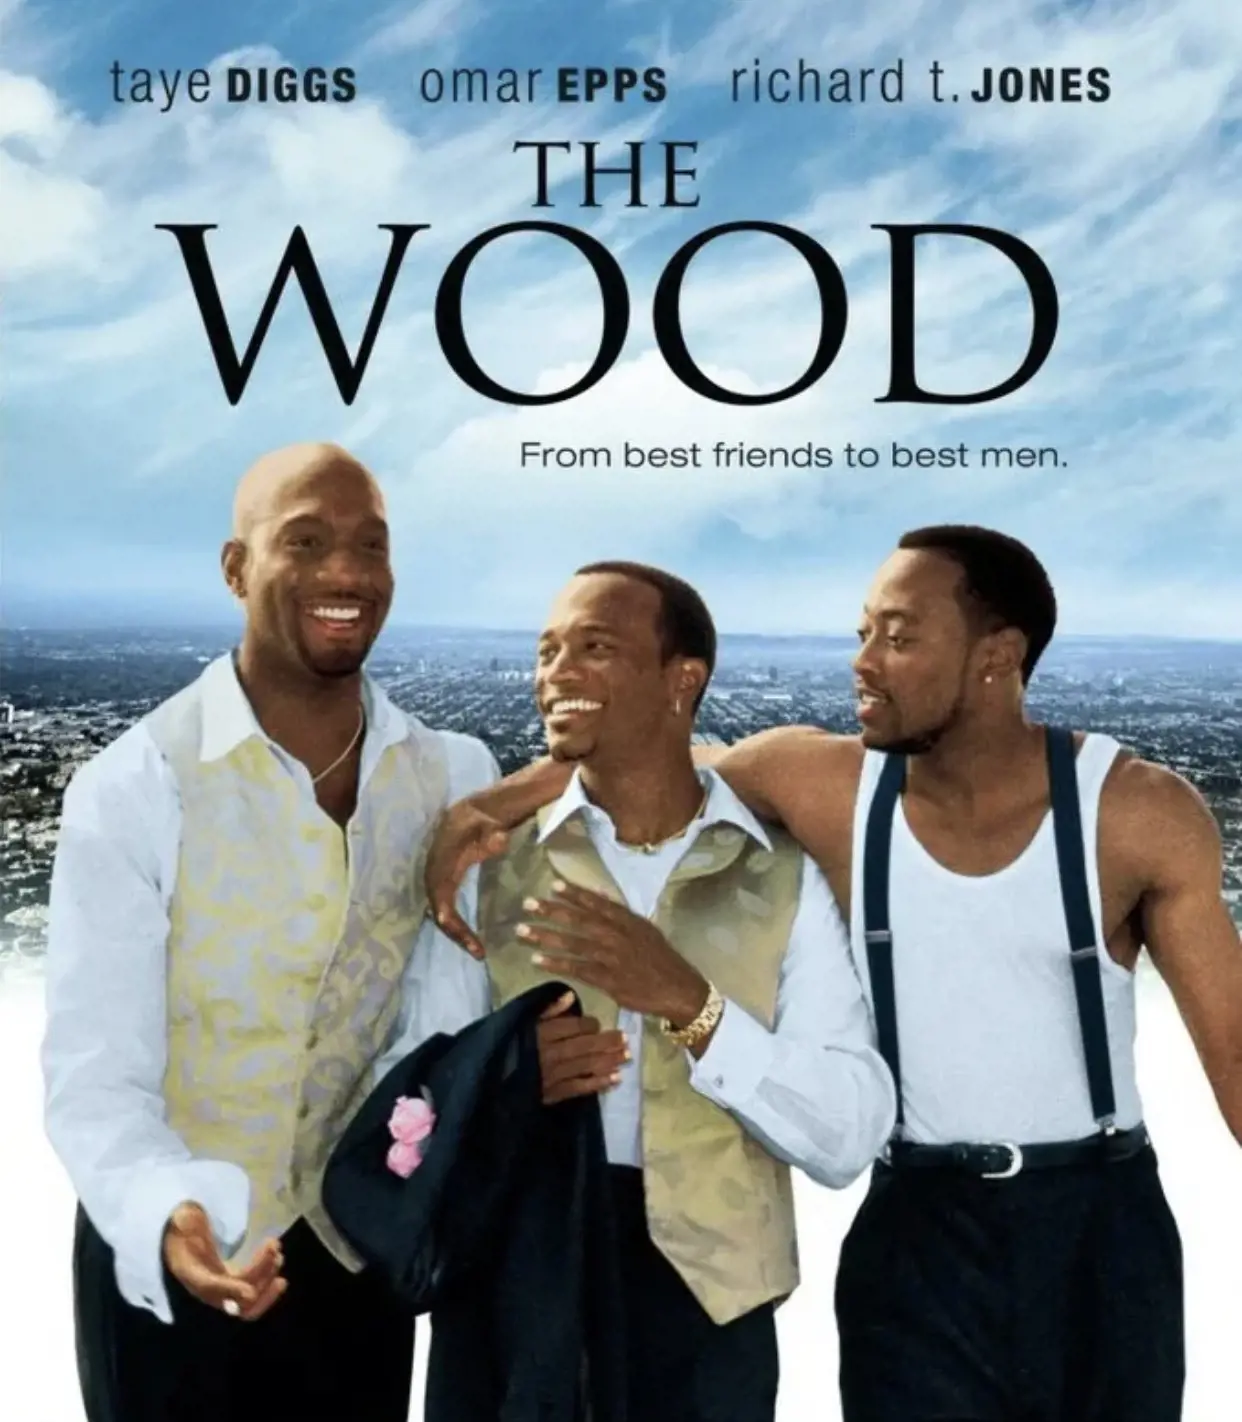 The Wood Received 2001 ASCAP Awards For The Song 'I Wanna Know'